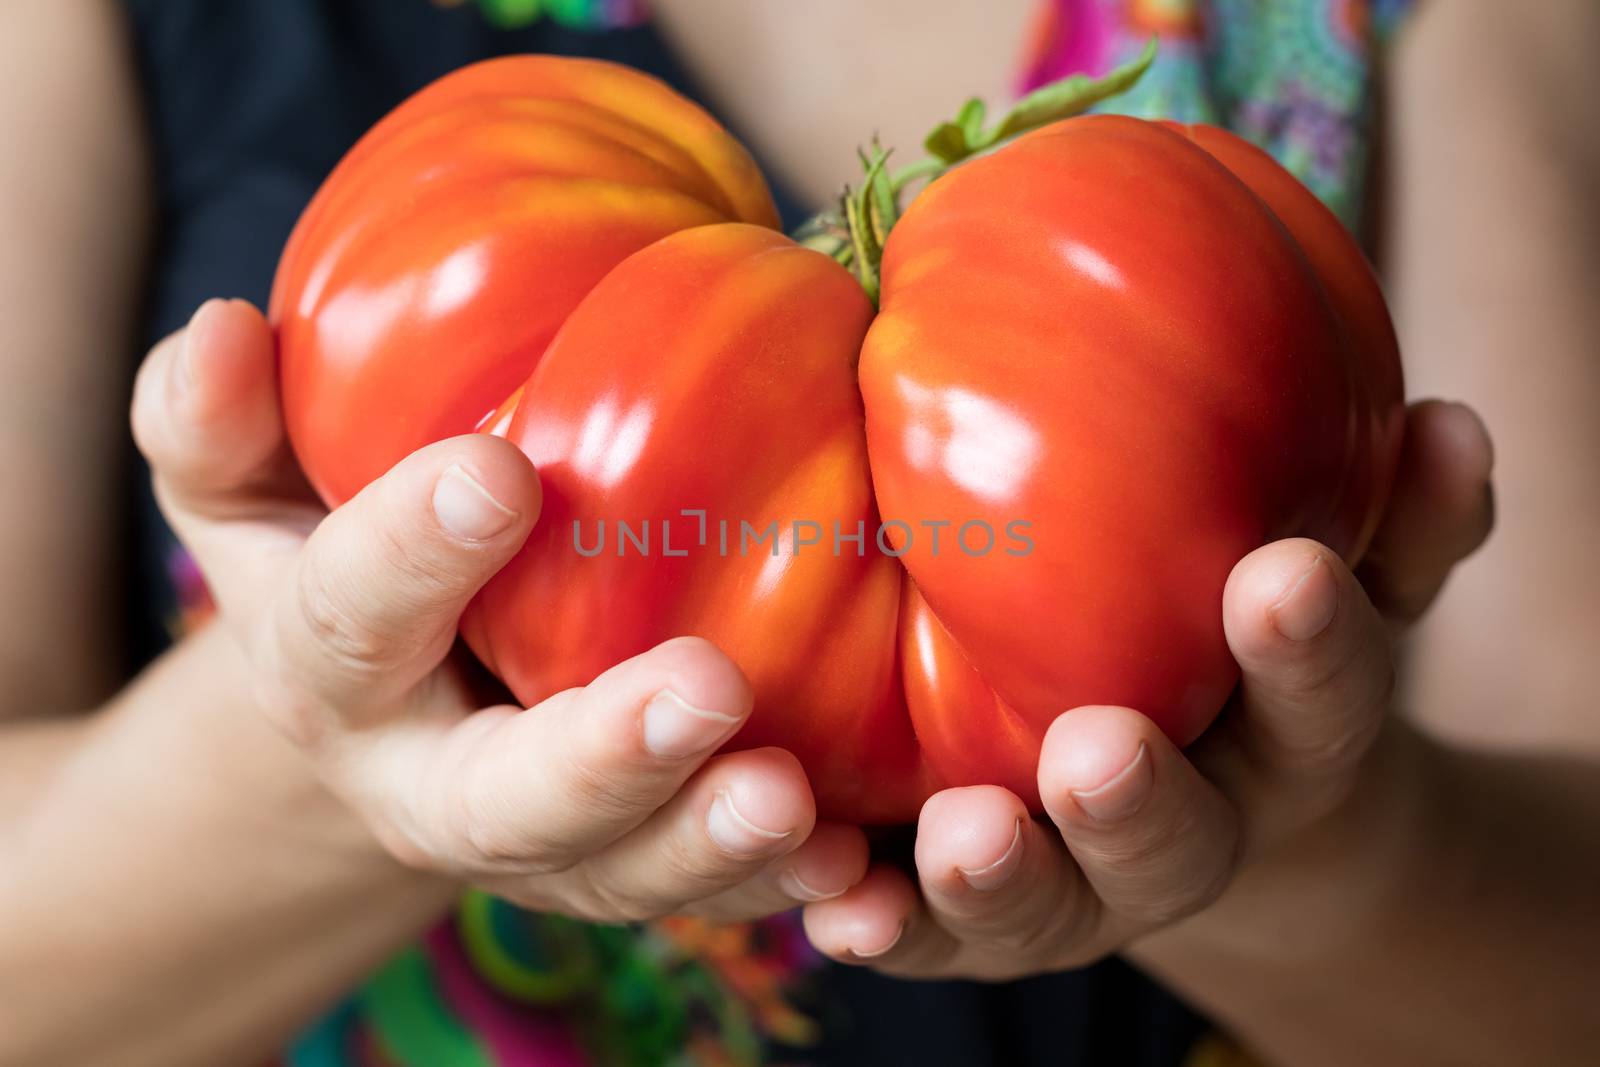 Hands holding and offering a giant Zapotec pleated heirloom tomato